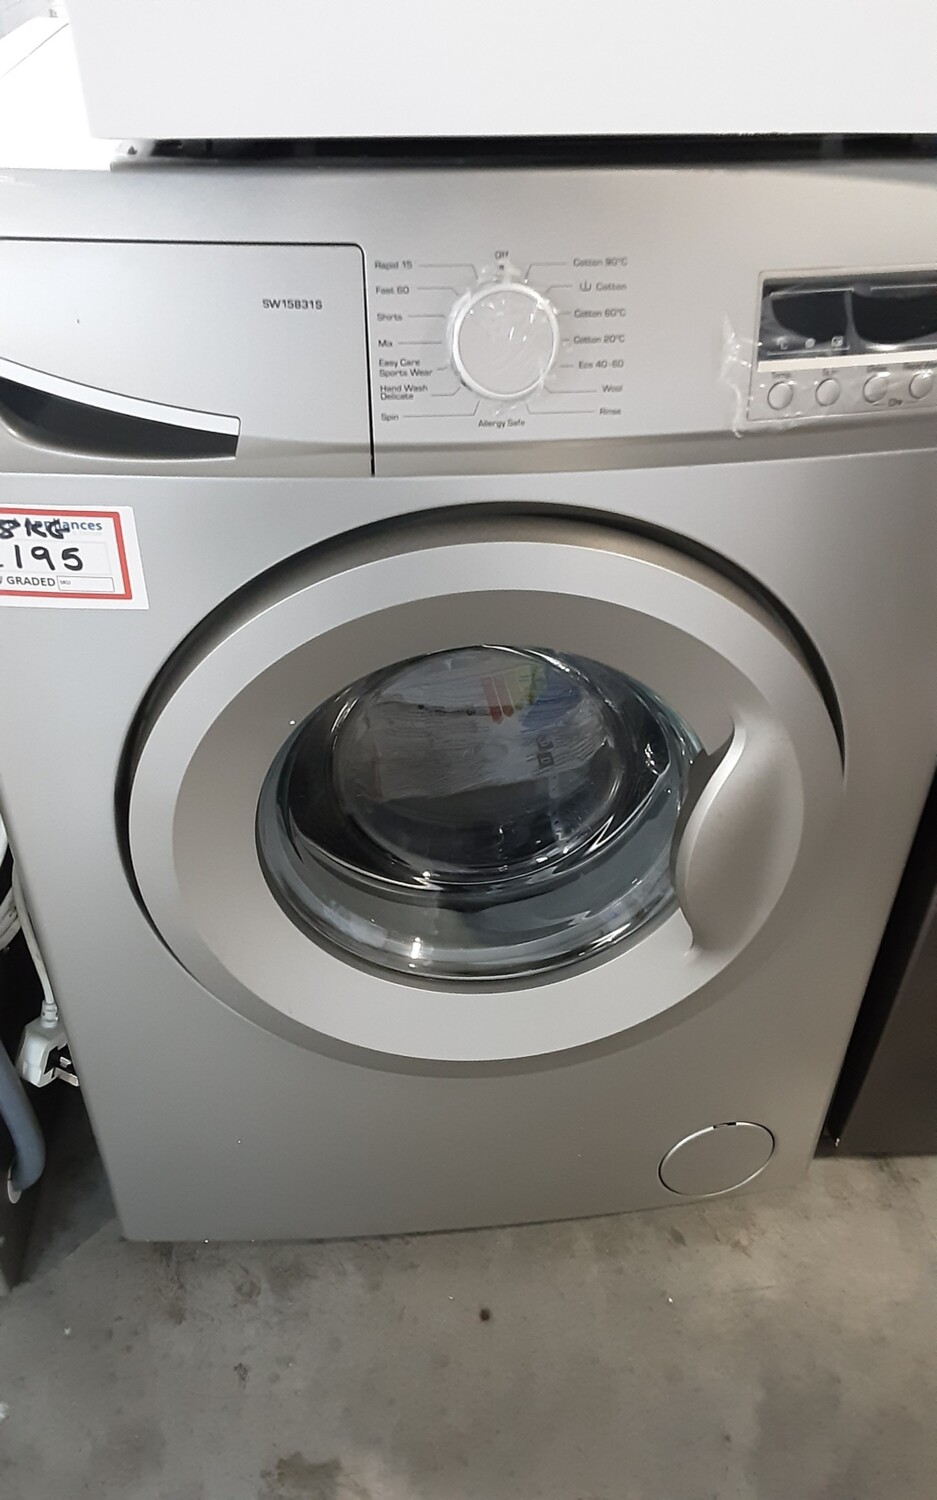 Swan SW15831S 8kg Load, 1200 Spin Washing Machine - Silver- New Graded - 12 Month Guarantee This Item is at our Whitby Road Shop